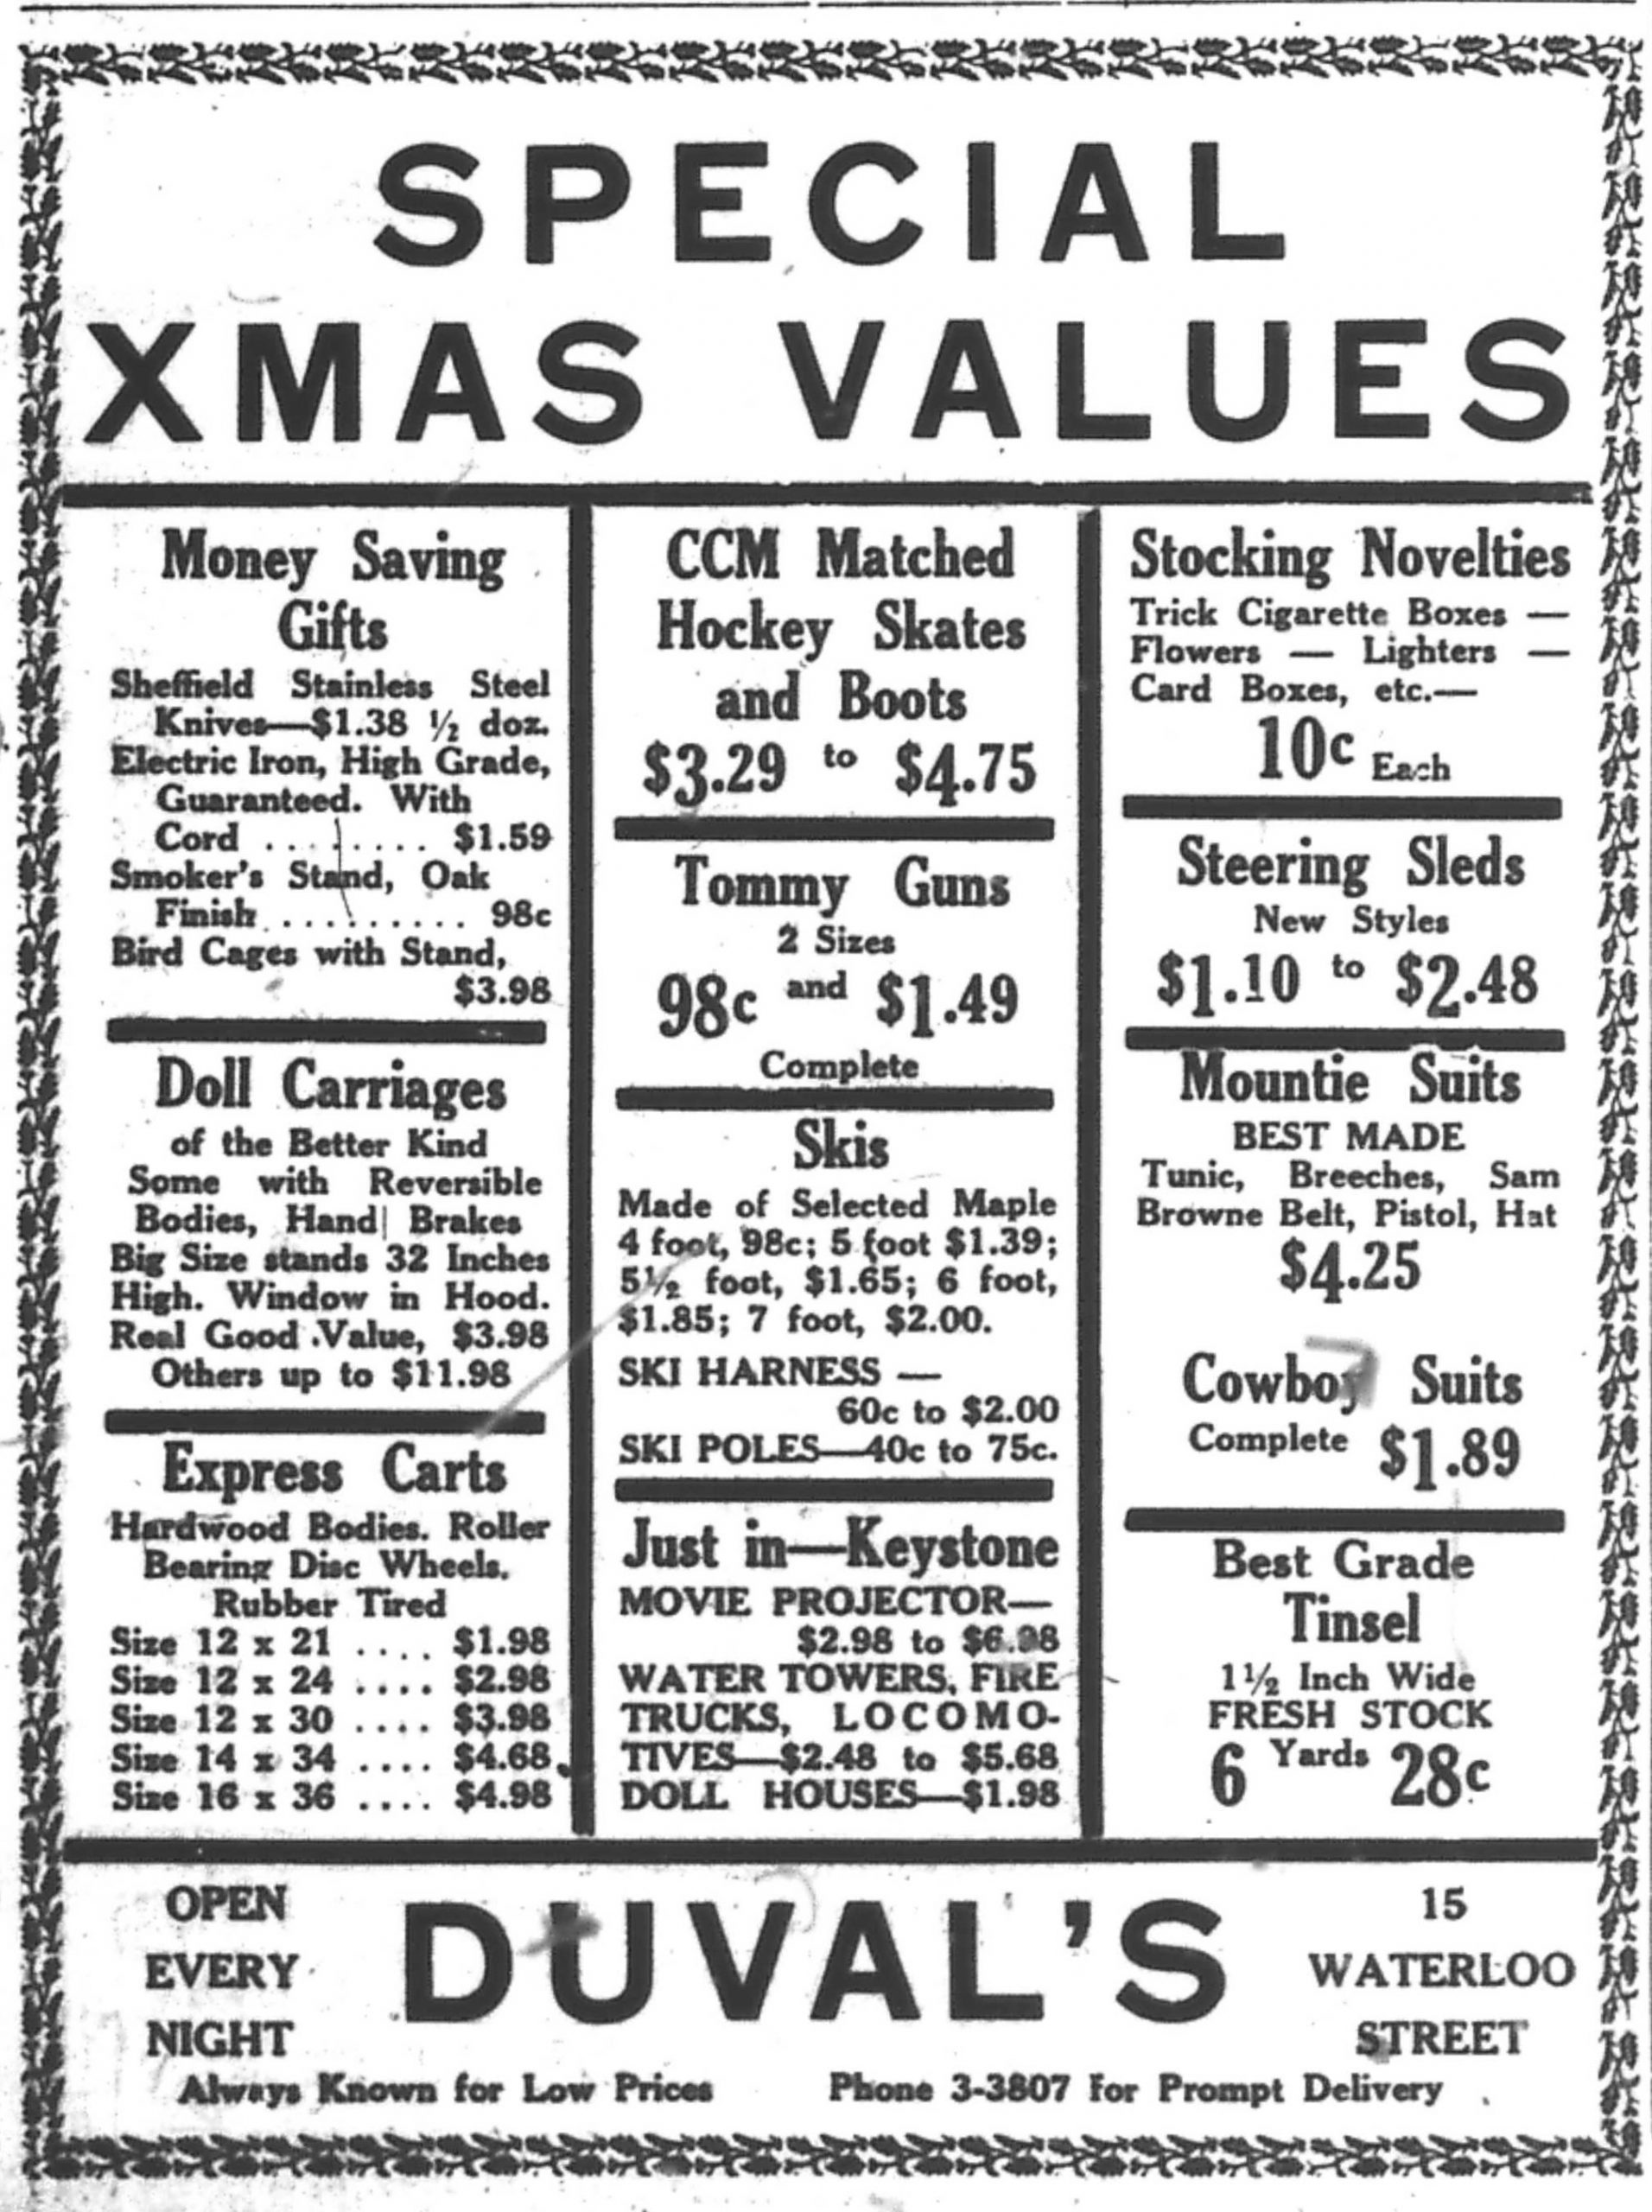 Newspaper advertisement – Special Christmas Values – Duval’s” with a list of toys including doll carriages, skates, sleds and “Mountie suits”.